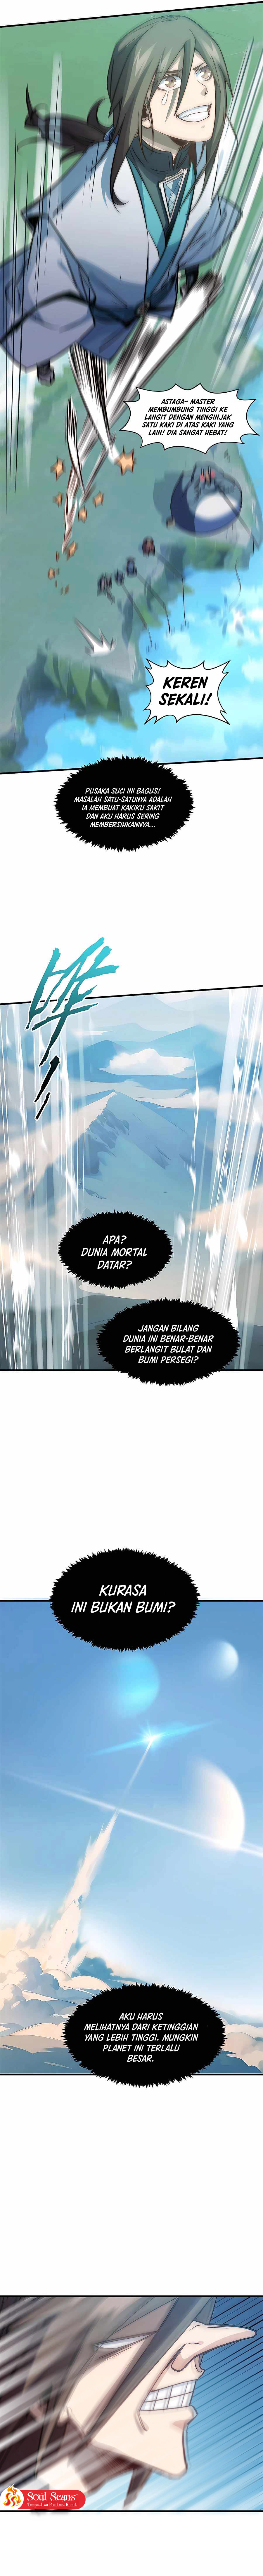 Dilarang COPAS - situs resmi www.mangacanblog.com - Komik top tier providence secretly cultivate for a thousand years 123 - chapter 123 124 Indonesia top tier providence secretly cultivate for a thousand years 123 - chapter 123 Terbaru 5|Baca Manga Komik Indonesia|Mangacan